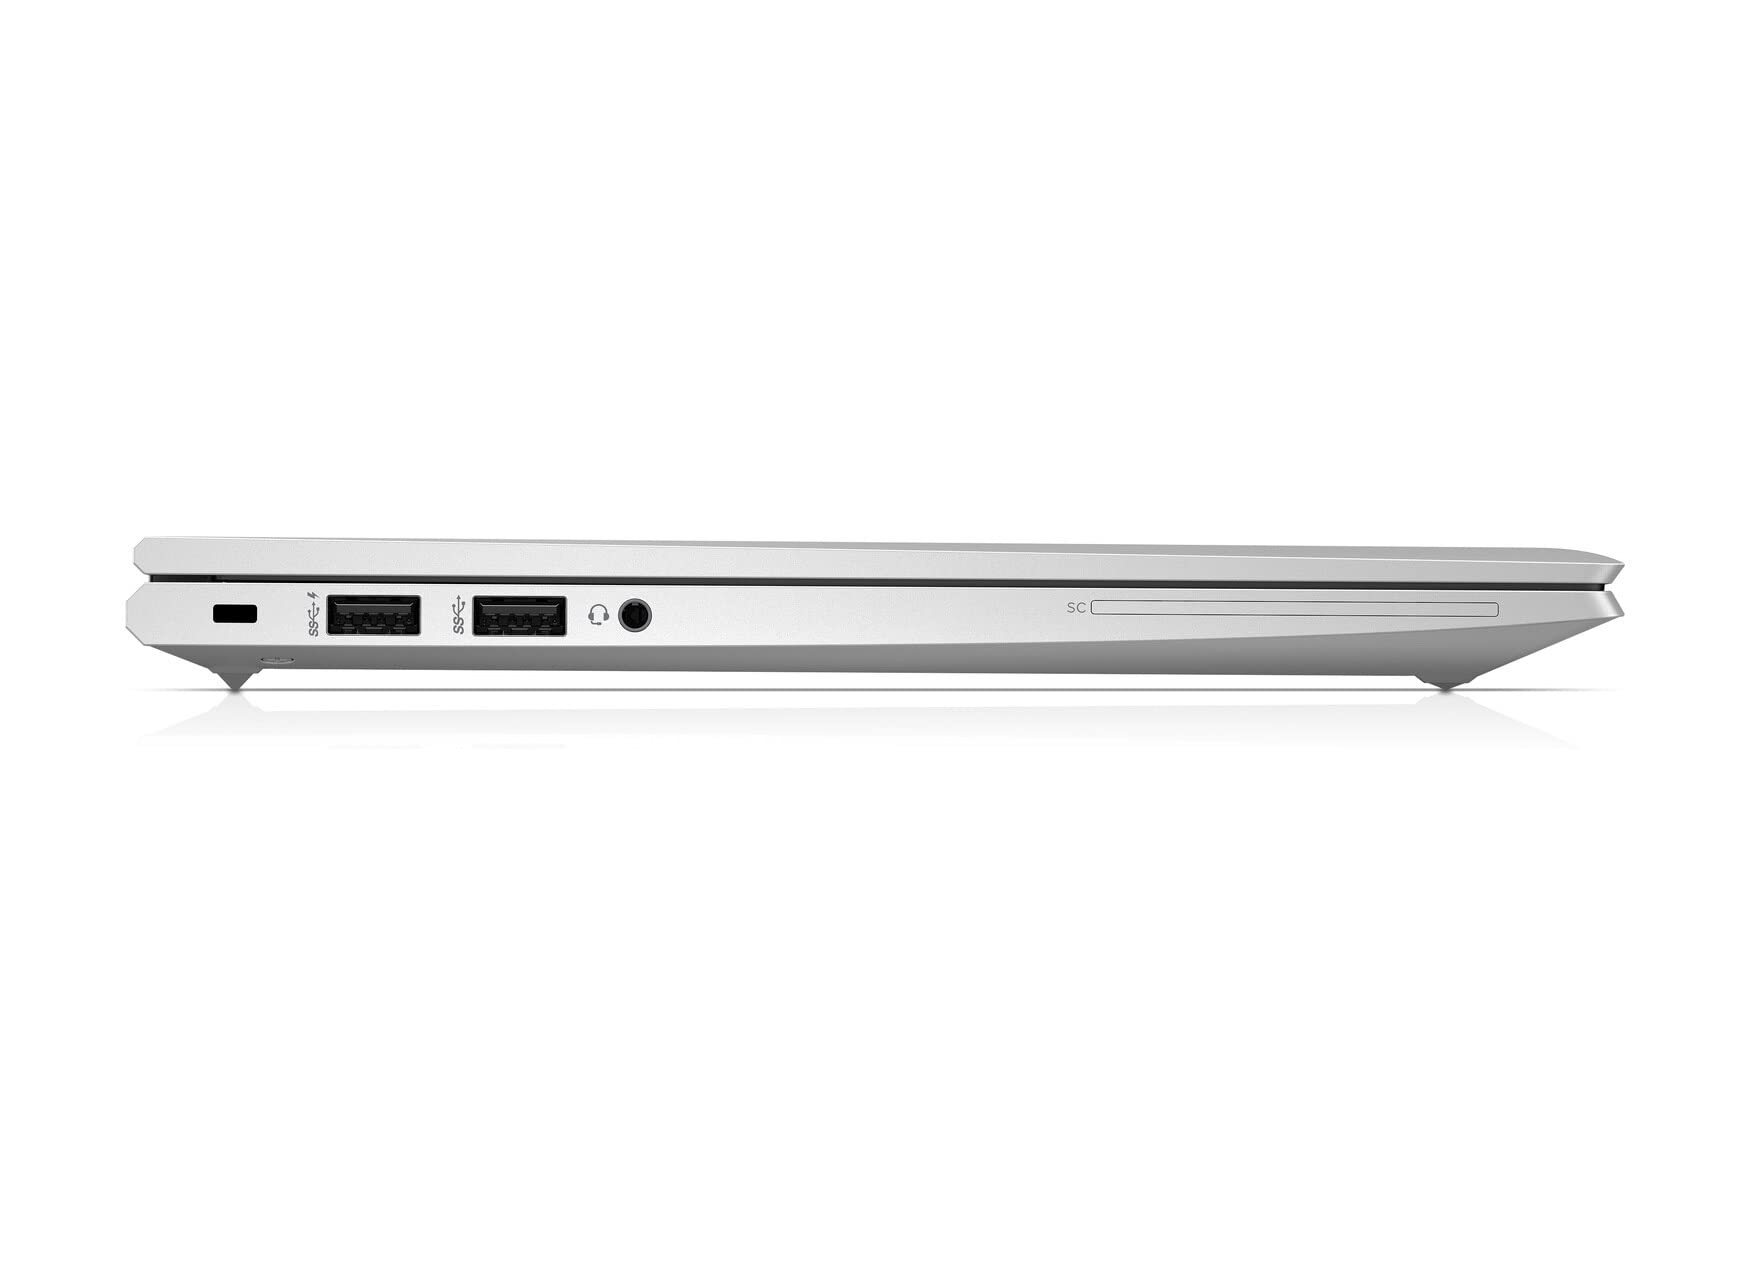 Copy of HP EliteBook 830 G8 13.3" FHD Laptop with HP Sure View Privacy Screen - Core i7 1185G7, 16GB DDR4, 512GB SSD, WIFI 6 & BT 5.2, Smart Card and Fingerprint Reader, Free upgrade to Windows 11 - Plain Box